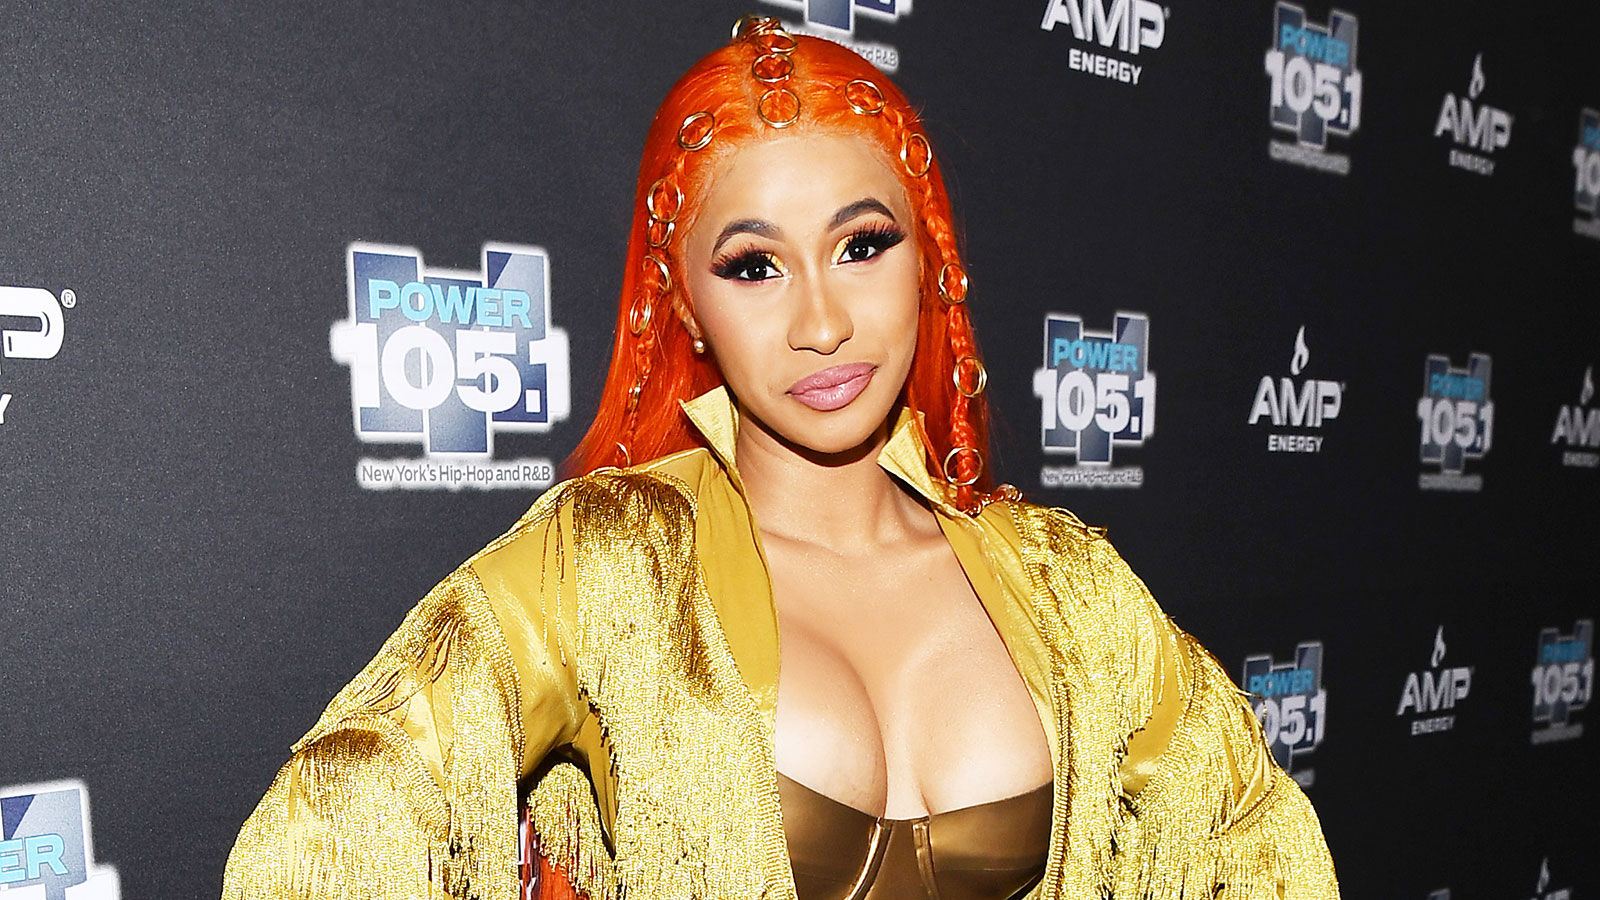 Puffy Candid Beach Nudes - Cardi B Plastic Surgery Complications Revealed: See Swollen Feet